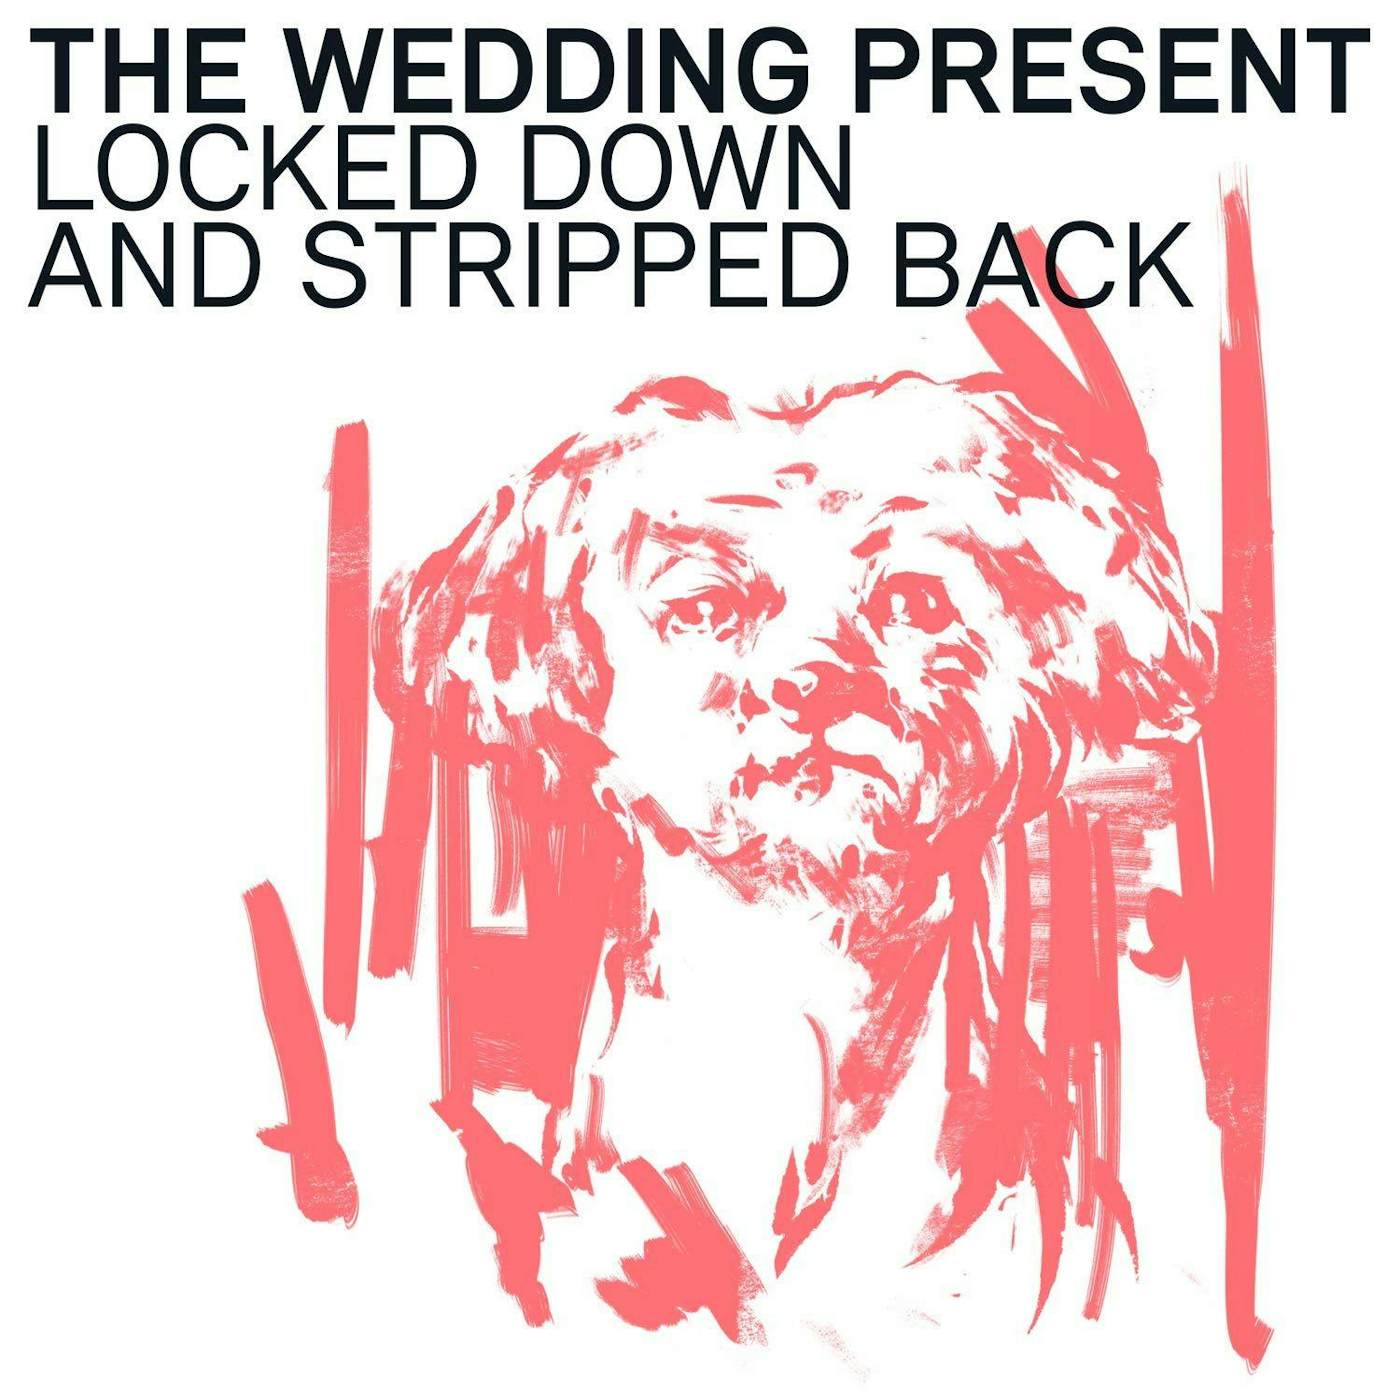 The Wedding Present Locked Down and Stripped Back Vinyl Record